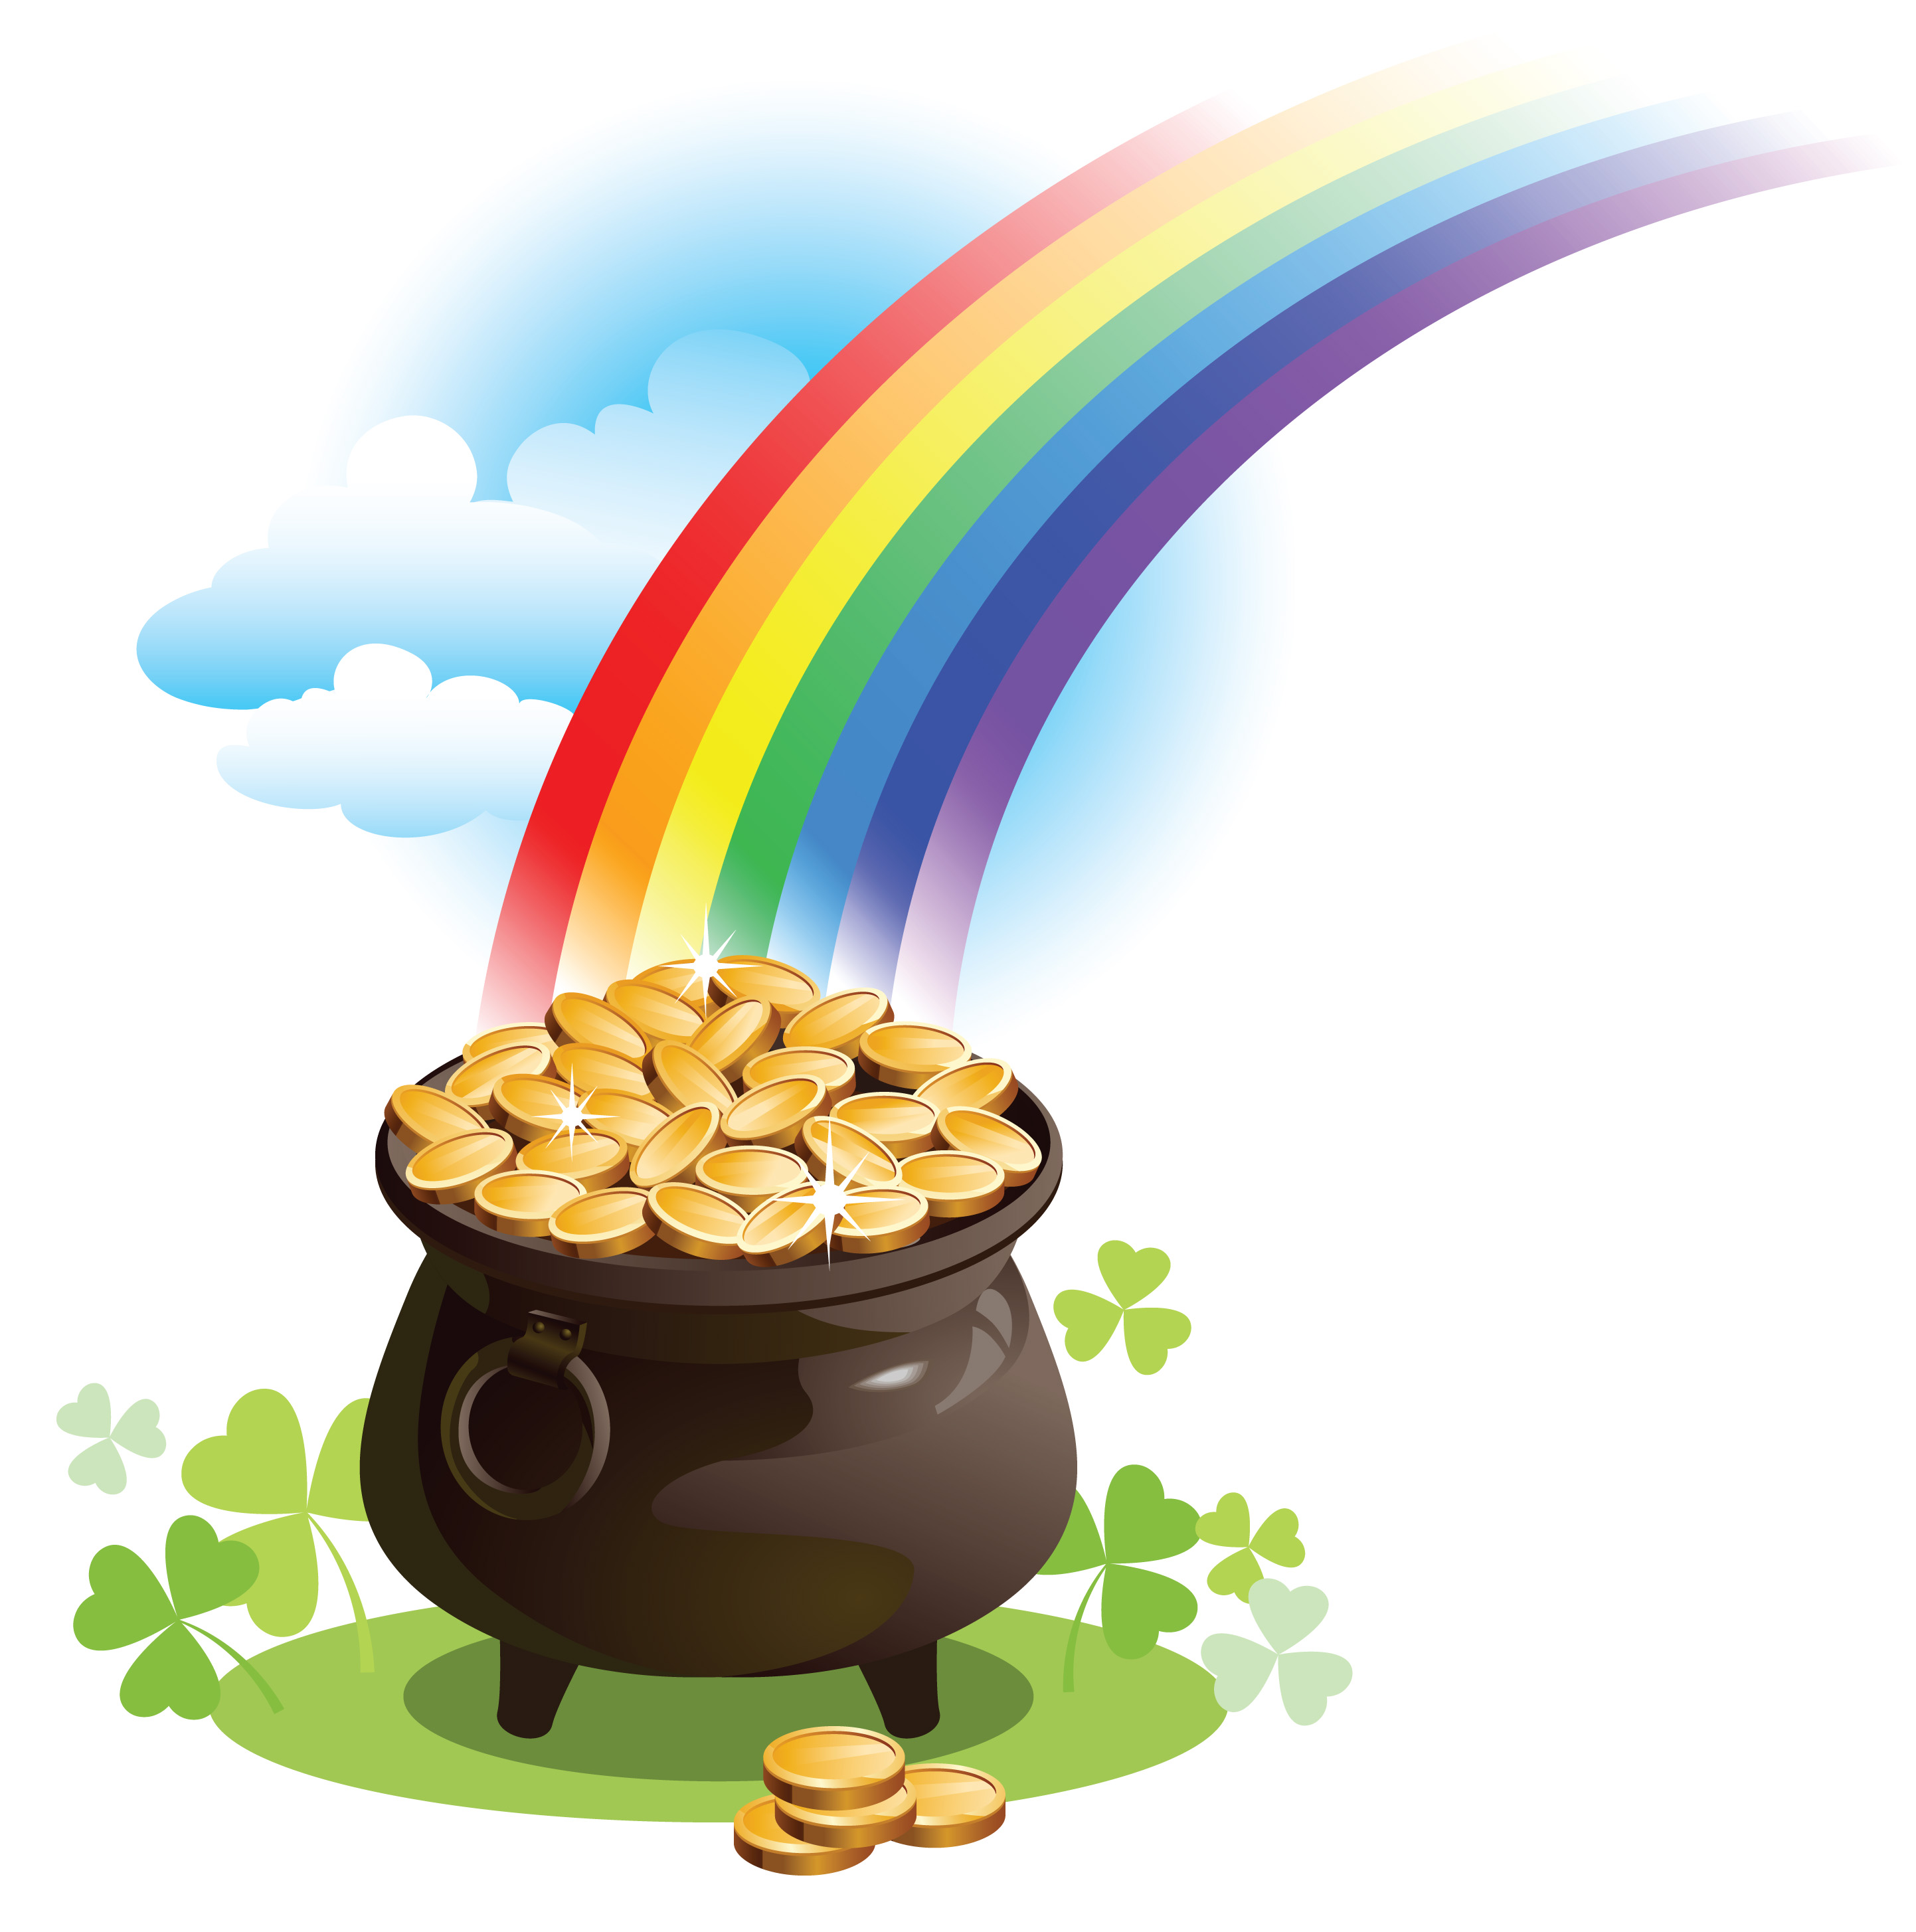 Rainbow With Pot Of Gold - ClipArt Best